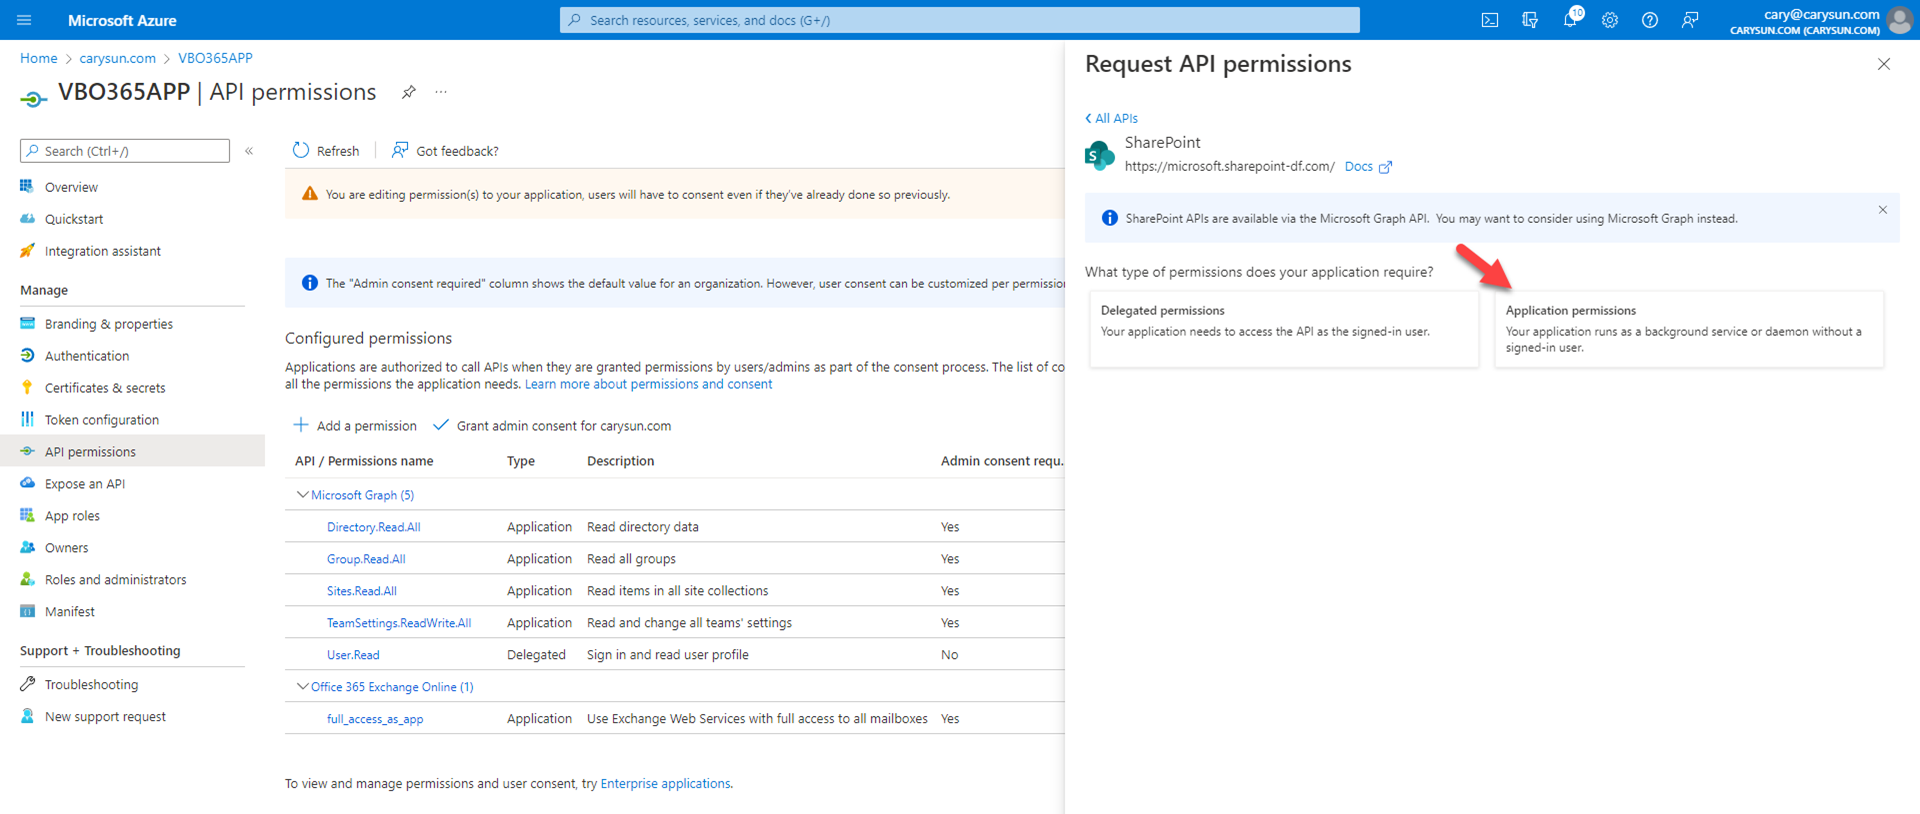 042022 1642 Howtoconfig23 - How to configure Azure AD Application Permissions for Modern App-Only Authentication of Veeam Backup for Microsoft 365